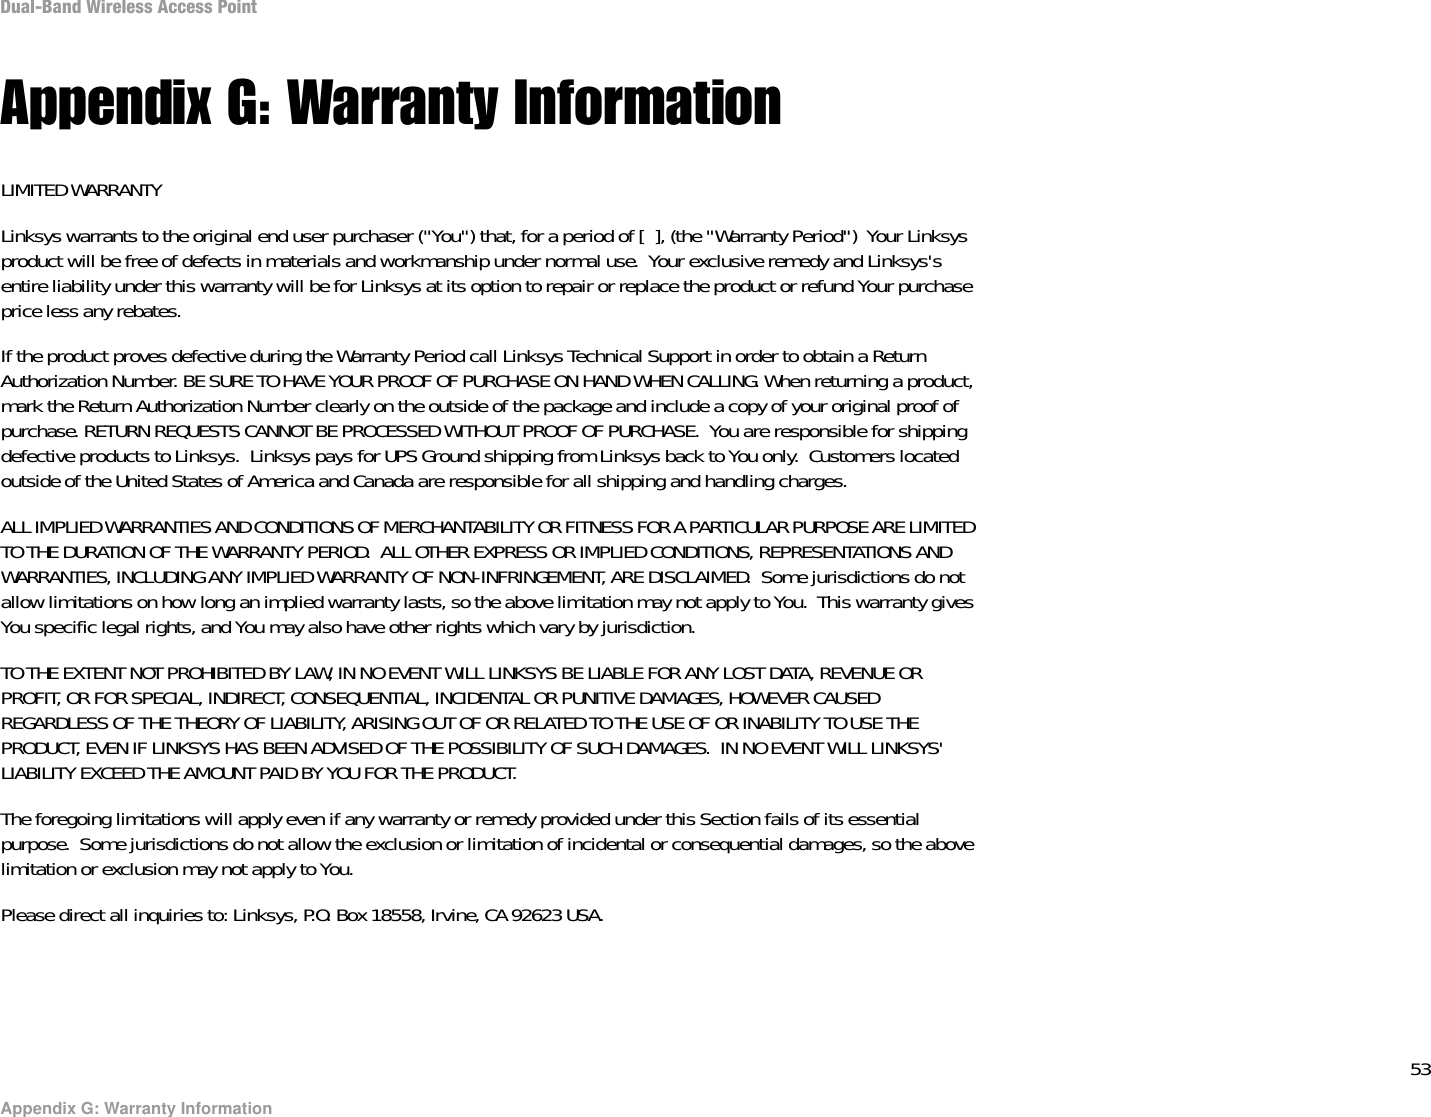 53Appendix G: Warranty InformationDual-Band Wireless Access PointAppendix G: Warranty InformationLIMITED WARRANTYLinksys warrants to the original end user purchaser (&quot;You&quot;) that, for a period of [  ], (the &quot;Warranty Period&quot;)  Your Linksys product will be free of defects in materials and workmanship under normal use.  Your exclusive remedy and Linksys&apos;s entire liability under this warranty will be for Linksys at its option to repair or replace the product or refund Your purchase price less any rebates.If the product proves defective during the Warranty Period call Linksys Technical Support in order to obtain a Return Authorization Number. BE SURE TO HAVE YOUR PROOF OF PURCHASE ON HAND WHEN CALLING. When returning a product, mark the Return Authorization Number clearly on the outside of the package and include a copy of your original proof of purchase. RETURN REQUESTS CANNOT BE PROCESSED WITHOUT PROOF OF PURCHASE.  You are responsible for shipping defective products to Linksys.  Linksys pays for UPS Ground shipping from Linksys back to You only.  Customers located outside of the United States of America and Canada are responsible for all shipping and handling charges. ALL IMPLIED WARRANTIES AND CONDITIONS OF MERCHANTABILITY OR FITNESS FOR A PARTICULAR PURPOSE ARE LIMITED TO THE DURATION OF THE WARRANTY PERIOD.  ALL OTHER EXPRESS OR IMPLIED CONDITIONS, REPRESENTATIONS AND WARRANTIES, INCLUDING ANY IMPLIED WARRANTY OF NON-INFRINGEMENT, ARE DISCLAIMED.  Some jurisdictions do not allow limitations on how long an implied warranty lasts, so the above limitation may not apply to You.  This warranty gives You specific legal rights, and You may also have other rights which vary by jurisdiction.TO THE EXTENT NOT PROHIBITED BY LAW, IN NO EVENT WILL LINKSYS BE LIABLE FOR ANY LOST DATA, REVENUE OR PROFIT, OR FOR SPECIAL, INDIRECT, CONSEQUENTIAL, INCIDENTAL OR PUNITIVE DAMAGES, HOWEVER CAUSED REGARDLESS OF THE THEORY OF LIABILITY, ARISING OUT OF OR RELATED TO THE USE OF OR INABILITY TO USE THE PRODUCT, EVEN IF LINKSYS HAS BEEN ADVISED OF THE POSSIBILITY OF SUCH DAMAGES.  IN NO EVENT WILL LINKSYS&apos; LIABILITY EXCEED THE AMOUNT PAID BY YOU FOR THE PRODUCT.  The foregoing limitations will apply even if any warranty or remedy provided under this Section fails of its essential purpose.  Some jurisdictions do not allow the exclusion or limitation of incidental or consequential damages, so the above limitation or exclusion may not apply to You.Please direct all inquiries to: Linksys, P.O. Box 18558, Irvine, CA 92623 USA.